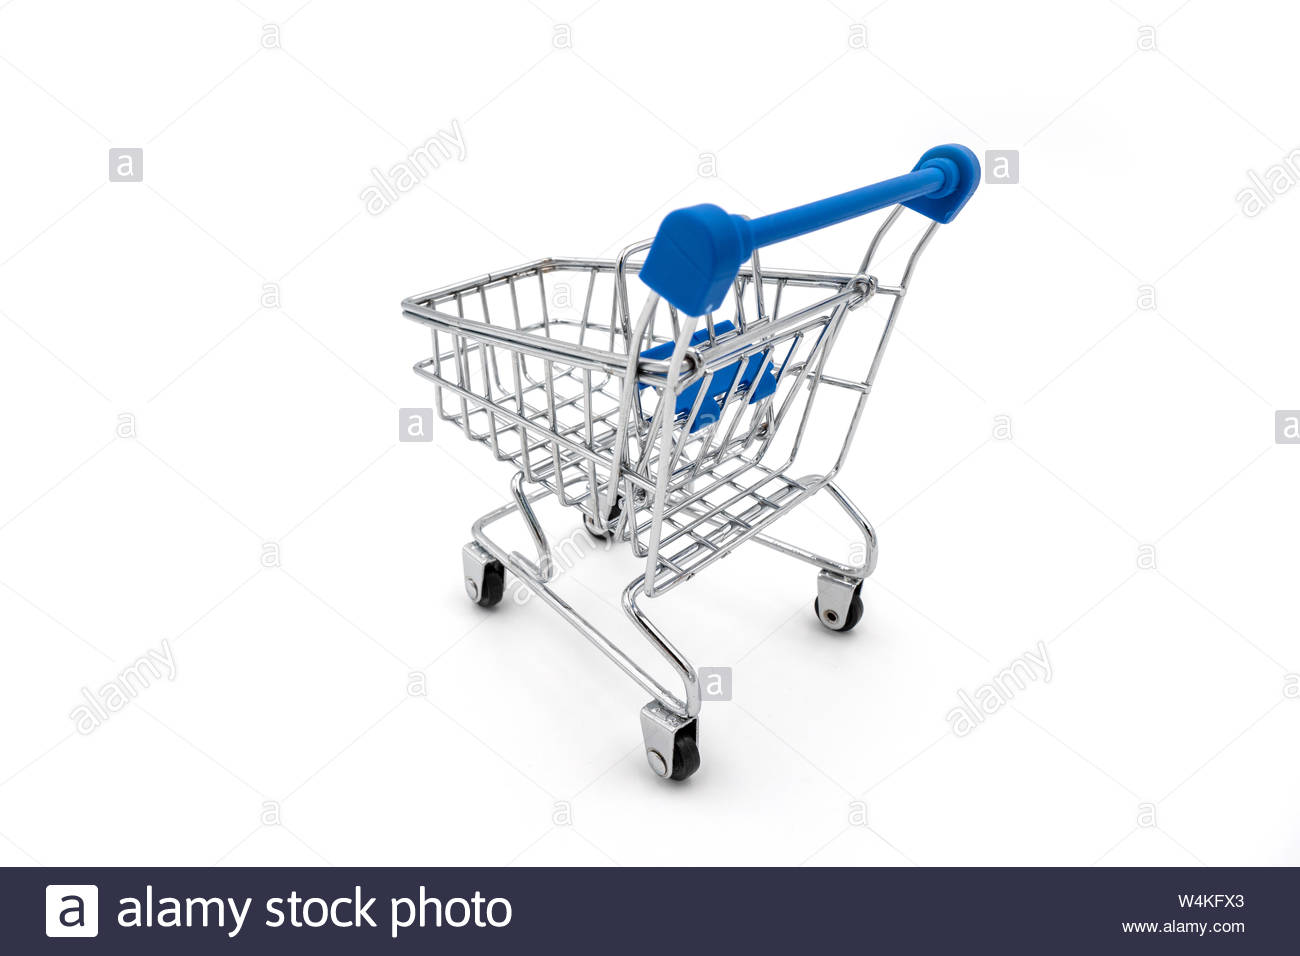 Blue Handle Small Shopping Cart Trolley Isolated On White